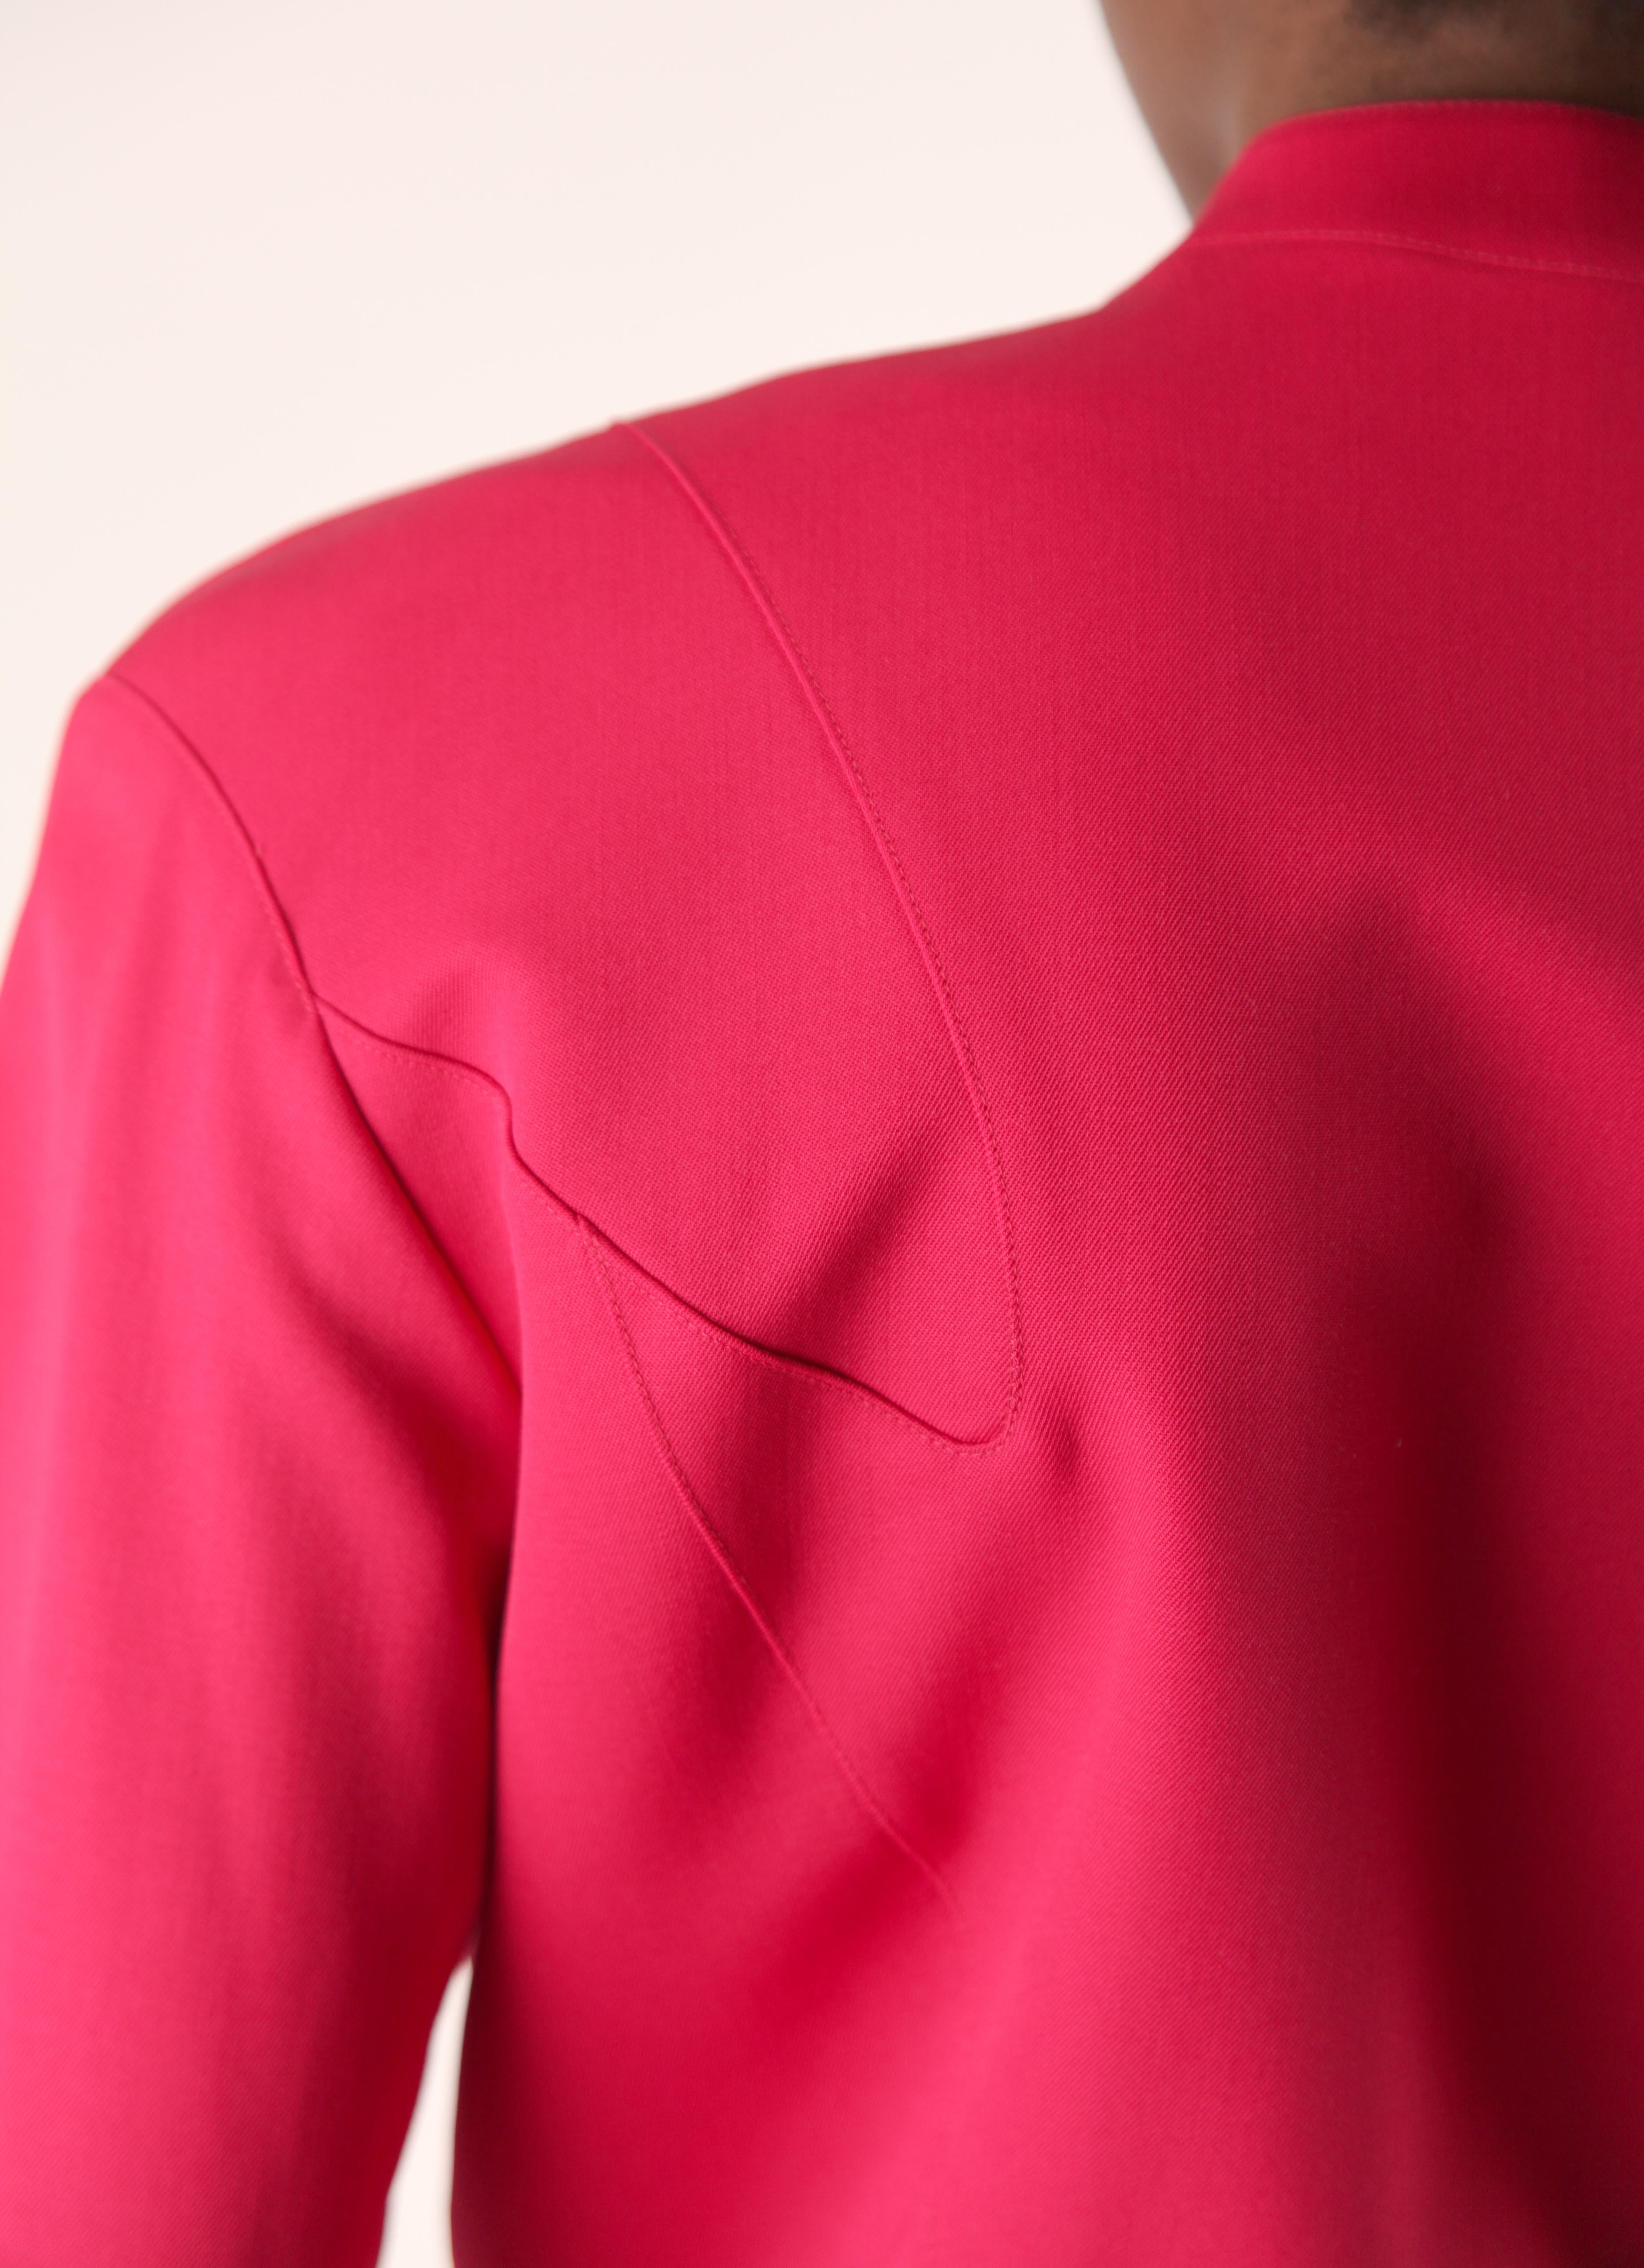 Thierry Mugler collectable intense “red-pink” hourglass jacket, circa 1980s In Good Condition For Sale In London, GB